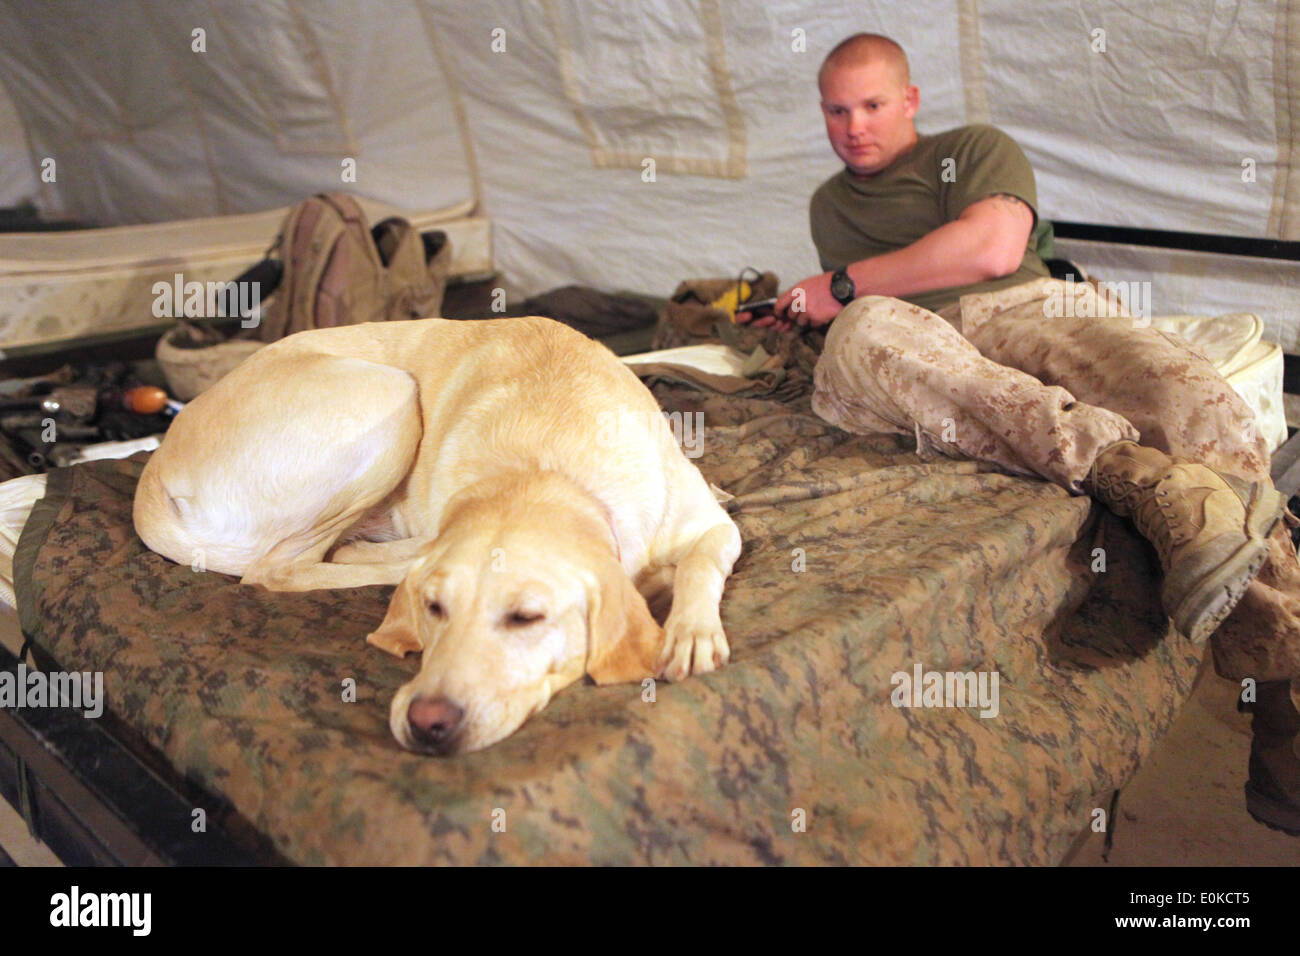 Lance Cpl. Cody Whitis, a Marine Corps dog handler, and an Arlington, Texas, native, and his military working dog, Gracie, catc he division is to partner with the Afghan National Security Forces and the Government of the Islamic Republic of Afghanistan to conduct counterinsurgency operations to secure the Afghan people, defeat insurgent forces, and enable ANSF assumption of security responsibilities within its area of operations in order to support the expansion of stability, development and legitimate governance. Stock Photo